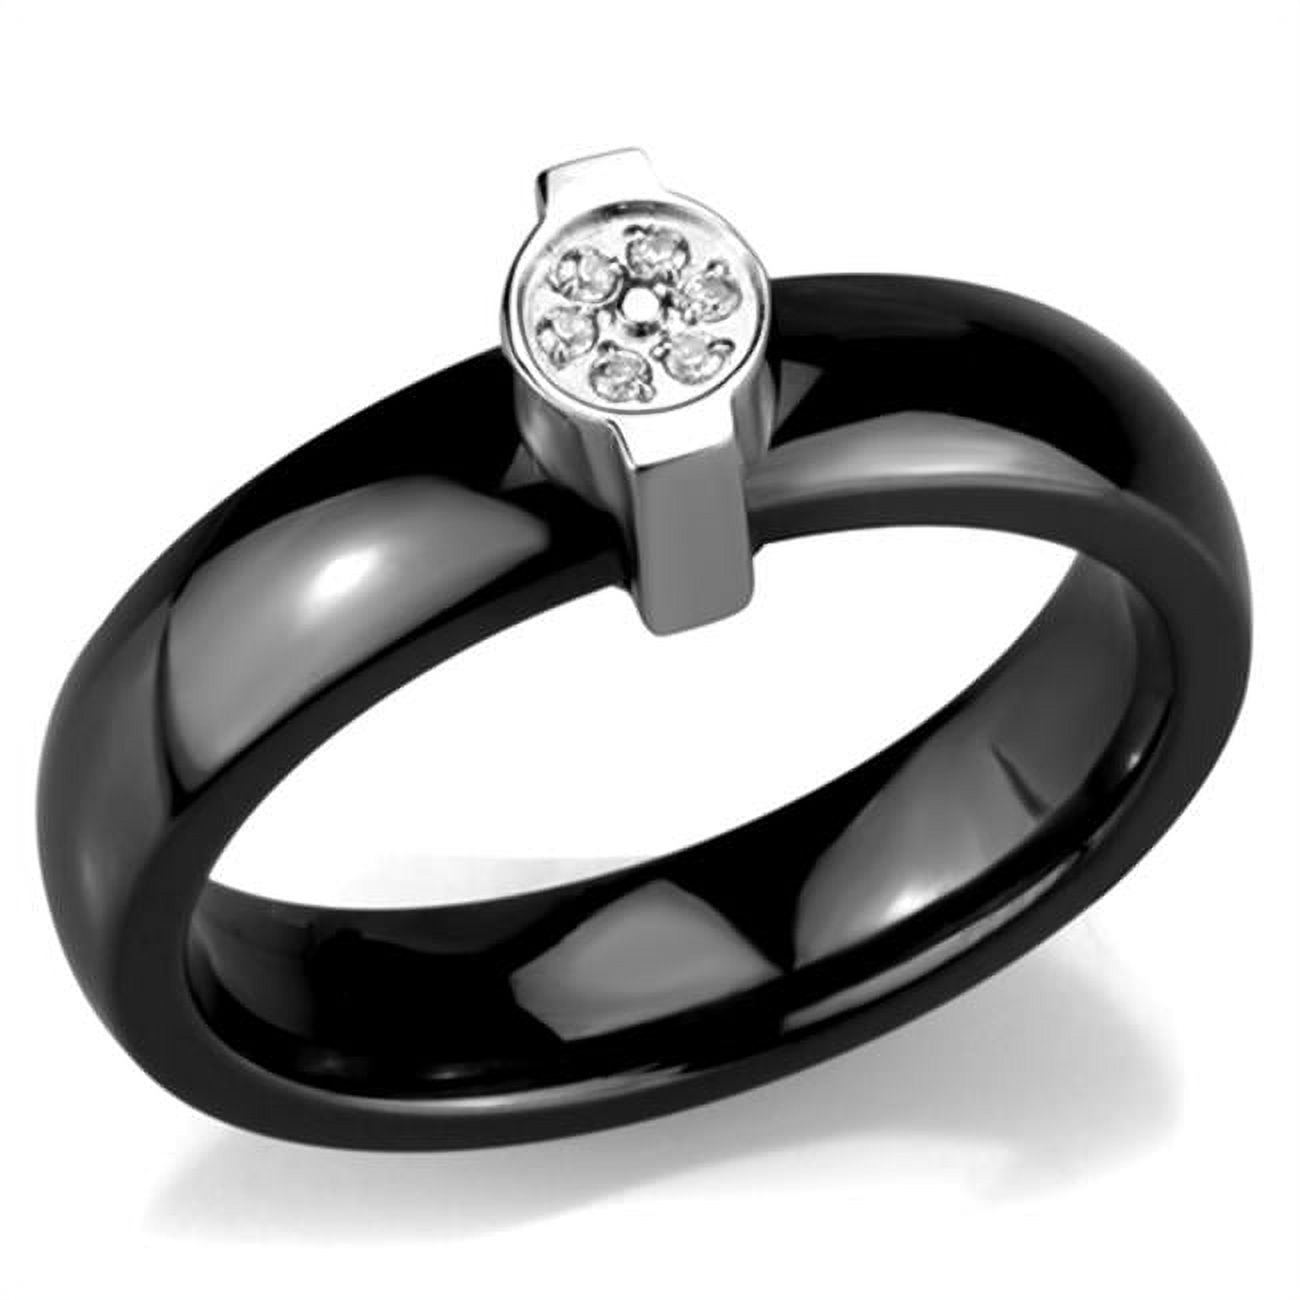 Picture of Alamode 3W959-6 Women High Polished Stainless Steel Ring with Ceramic in Jet - Size 6